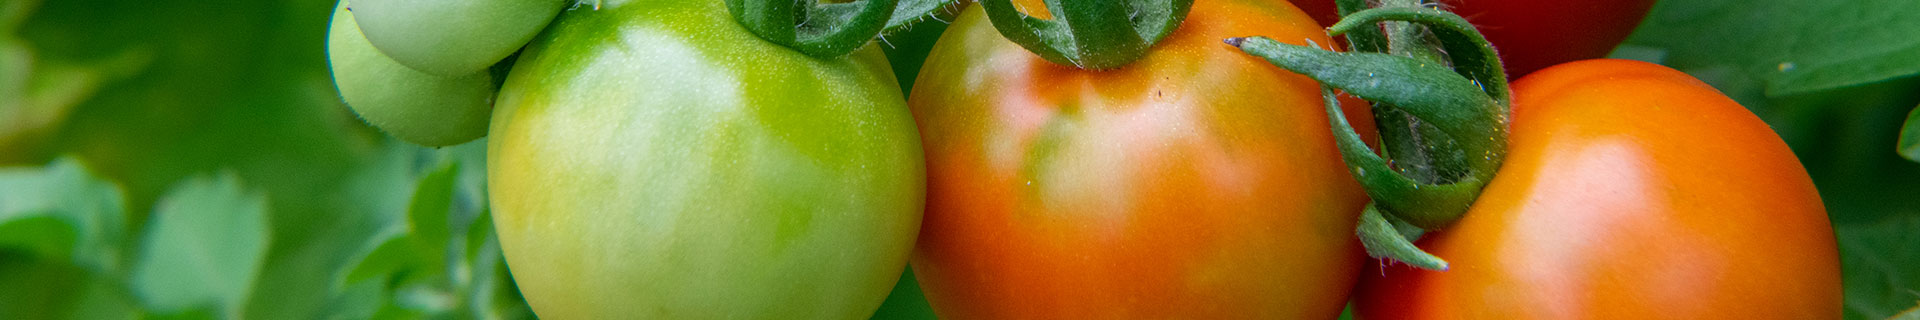 <p><strong>How to grow tomatoes like a pro</strong></p>
<p> </p>
